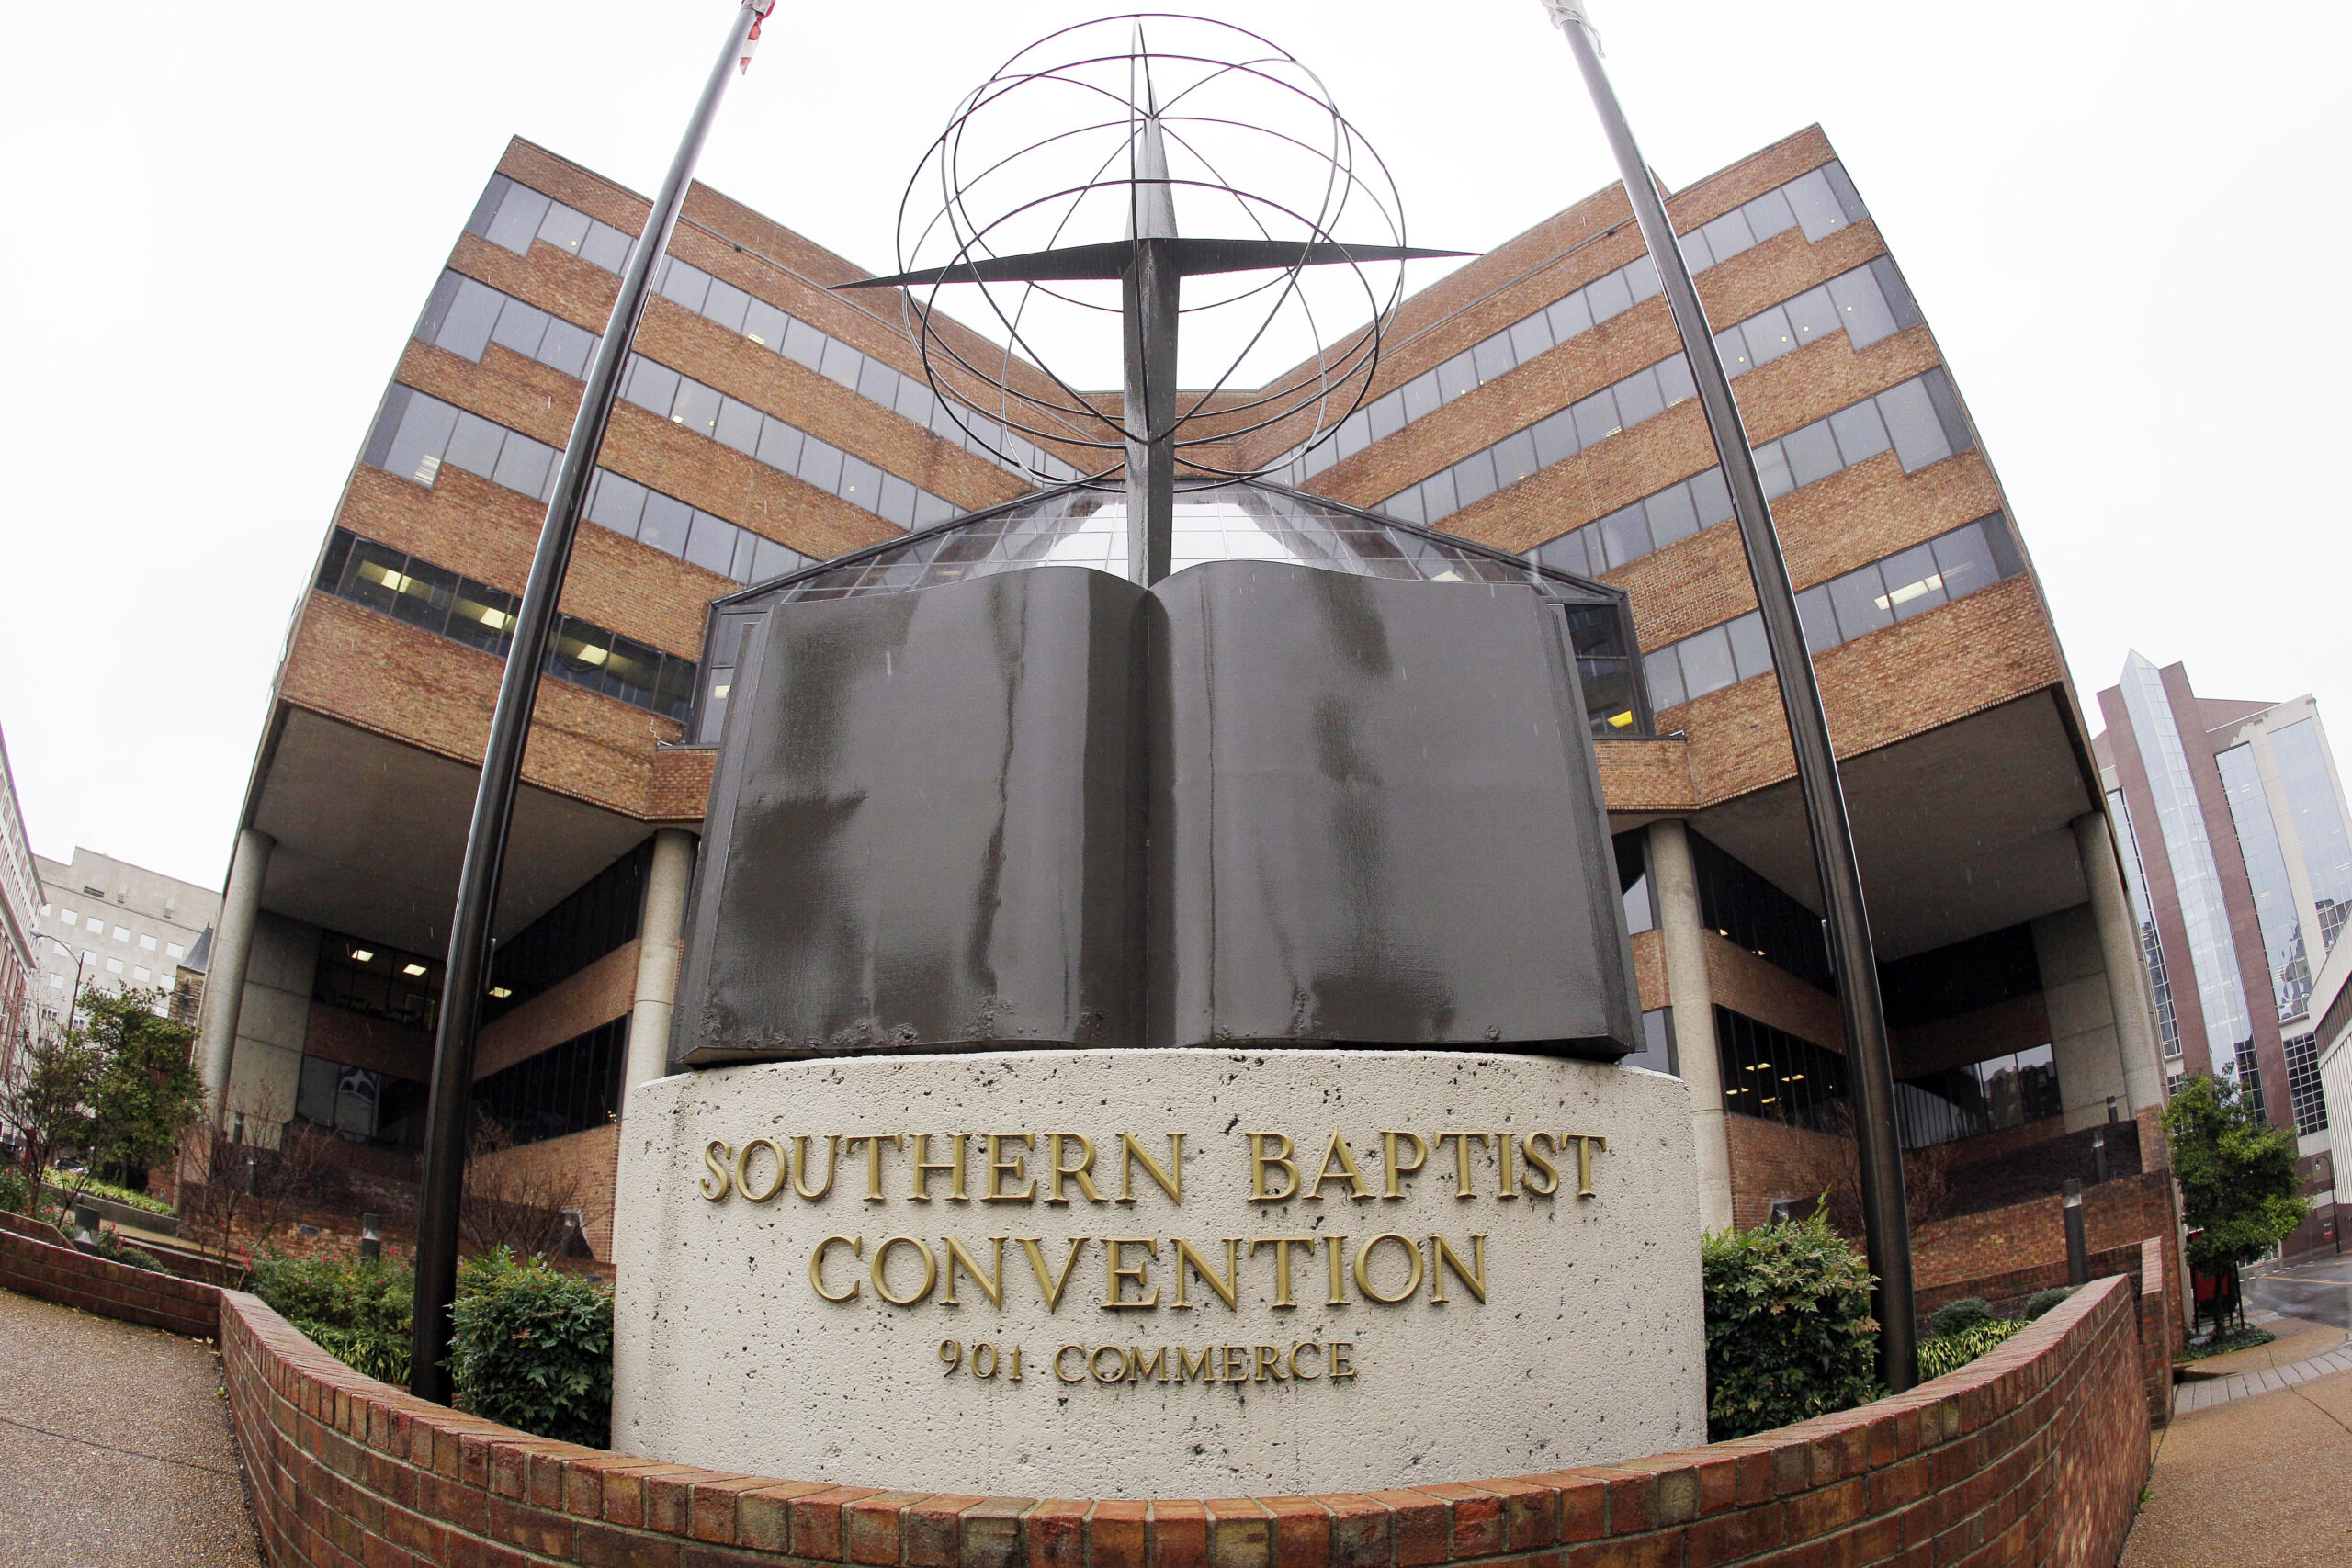 FILE - This Wednesday, Dec. 7, 2011 file photo shows the headquarters of the Southern Baptist Convention in Nashville, Tenn. Leaders of the SBC, America's largest Protestant denomination, stonewalled and denigrated survivors of clergy sex abuse over almost two decades while seeking to protect their own reputations, according to a scathing 288-page investigative report issued Sunday, May 22, 2022. (AP Photo/Mark Humphrey, File)